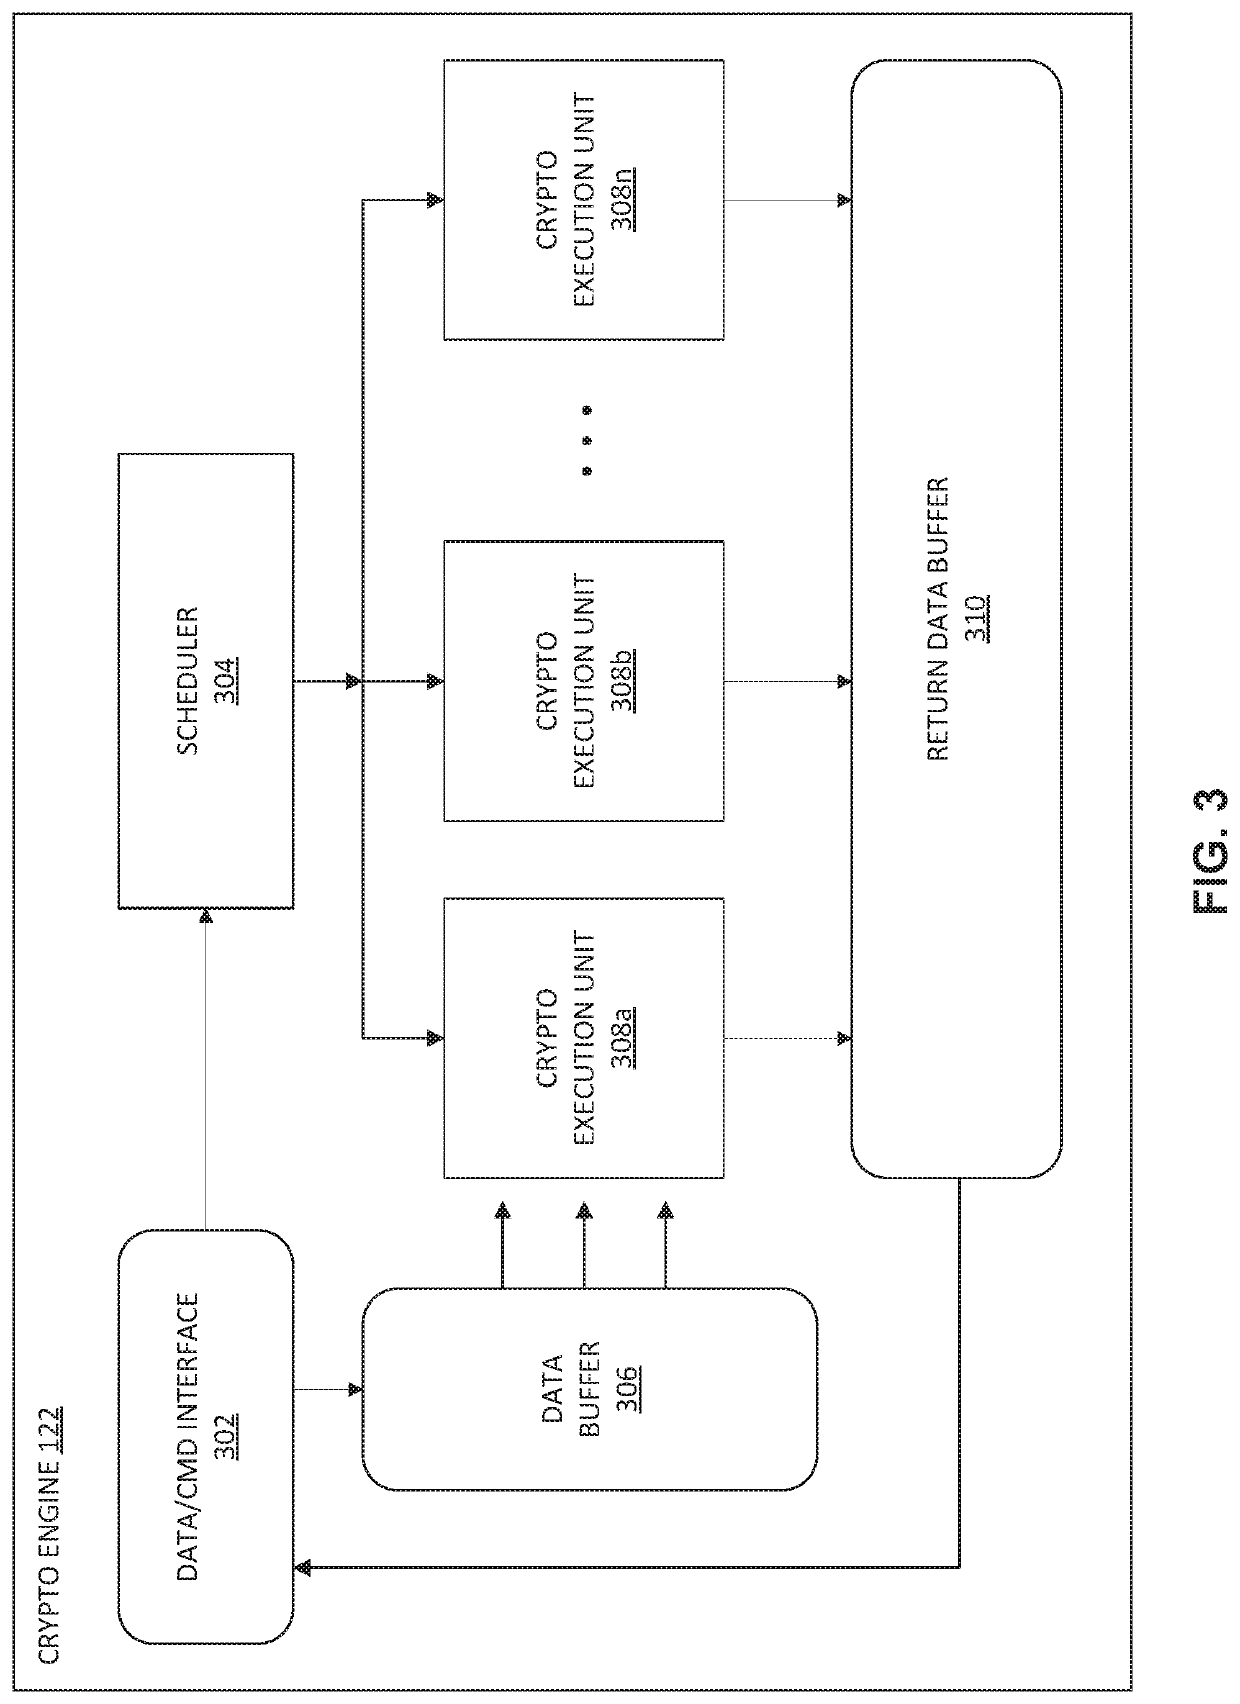 Systems and methods for performing programmable smart contract execution